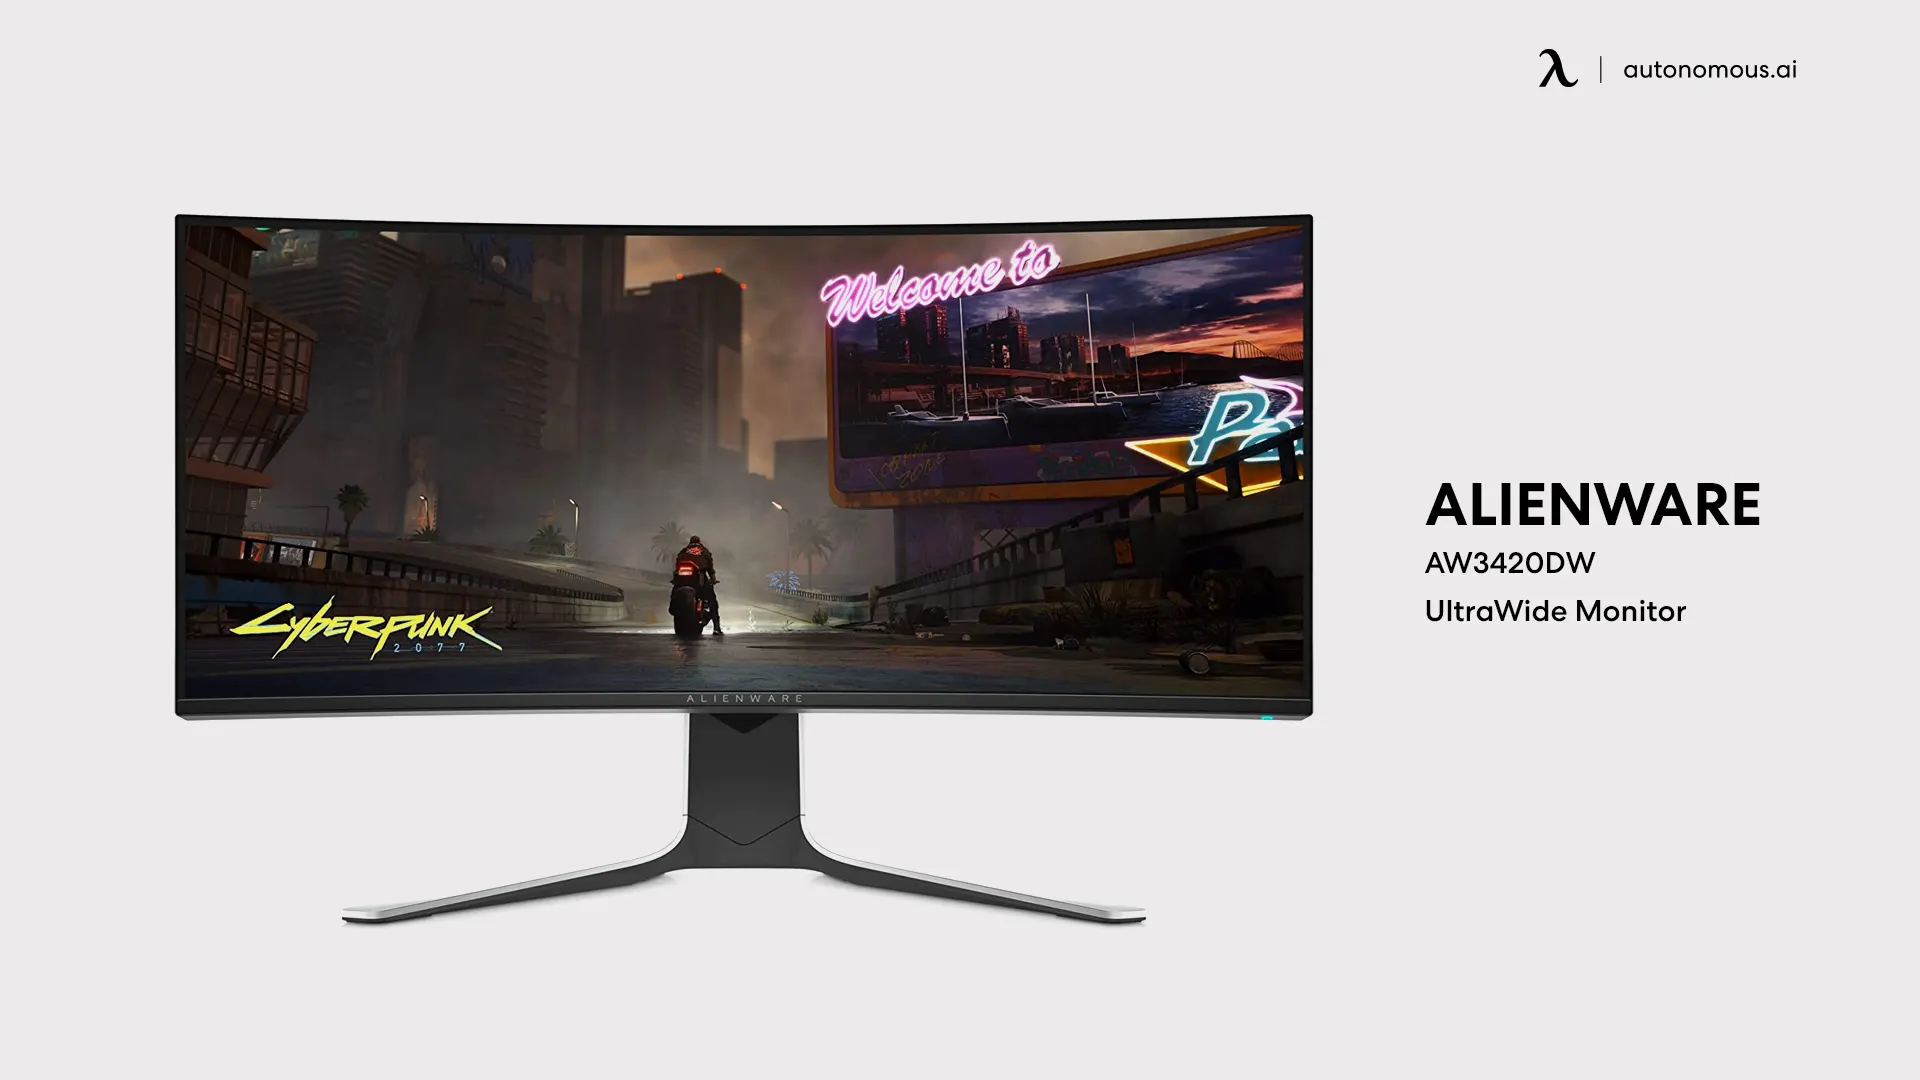 Alienware AW3420DW wide monitor